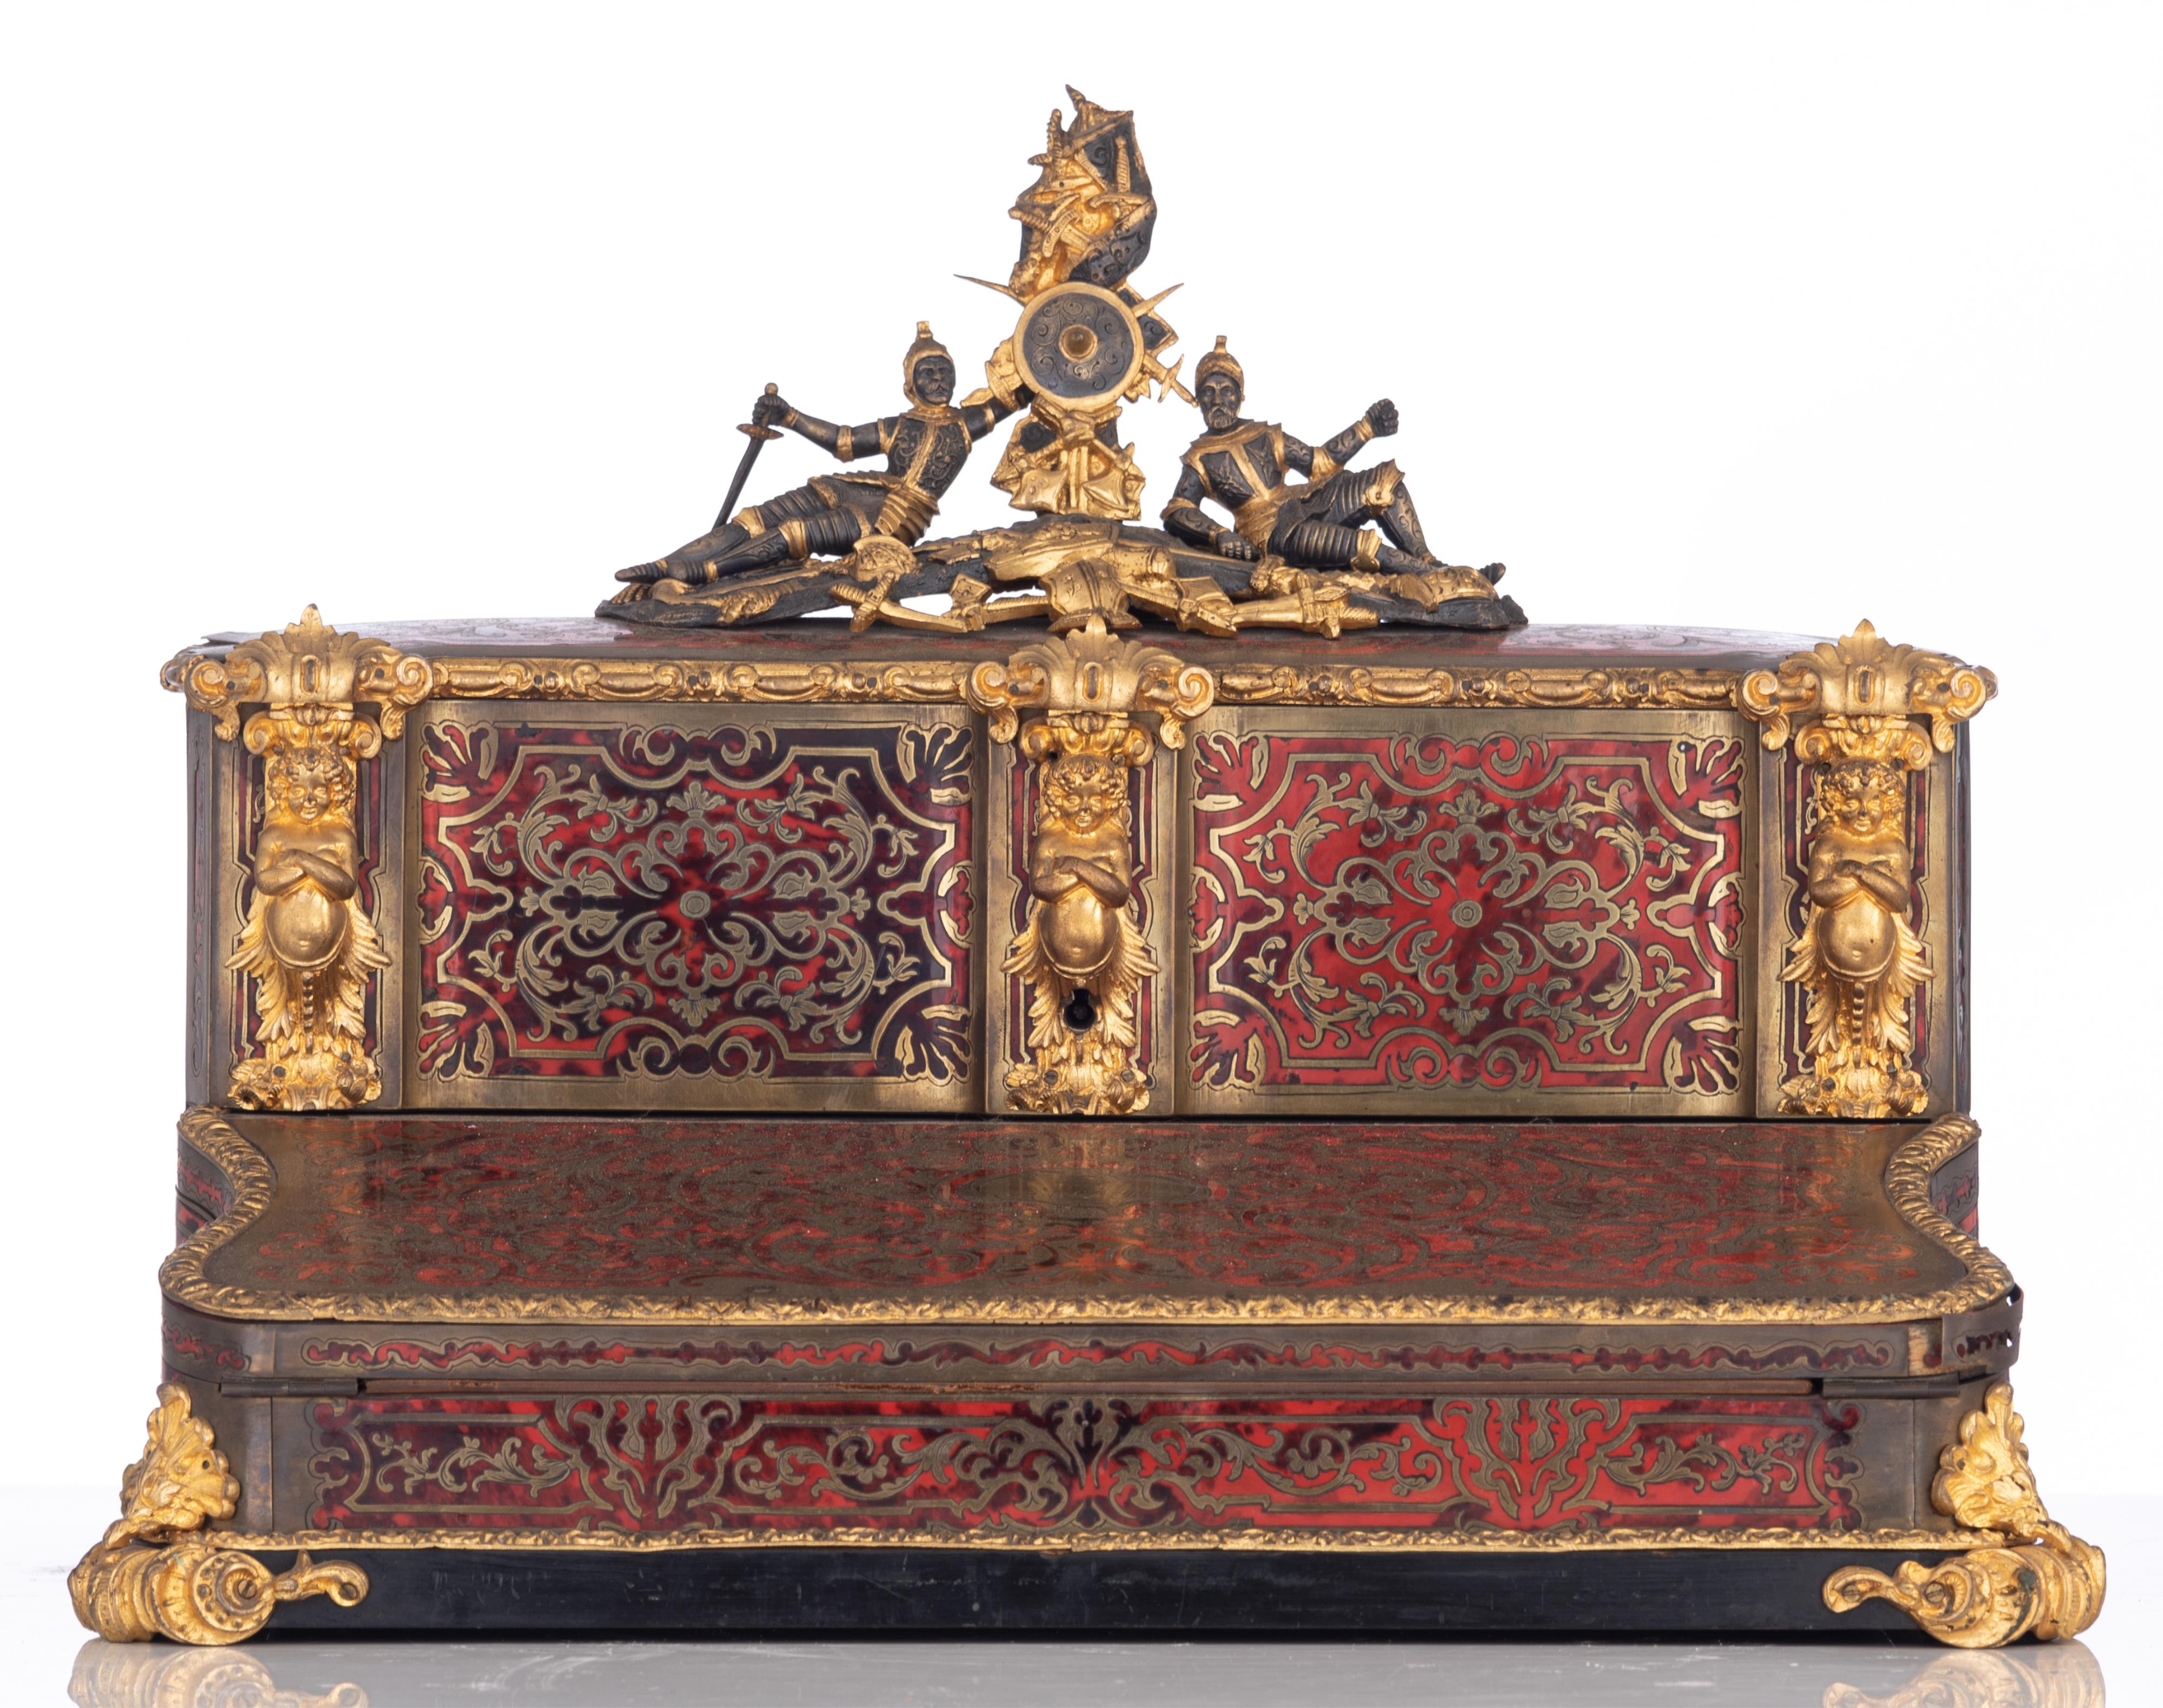 A fine Historicism Revival Napoleon III Boulle work walnut '‚critoire', with gilt bronze mounts and - Image 2 of 15